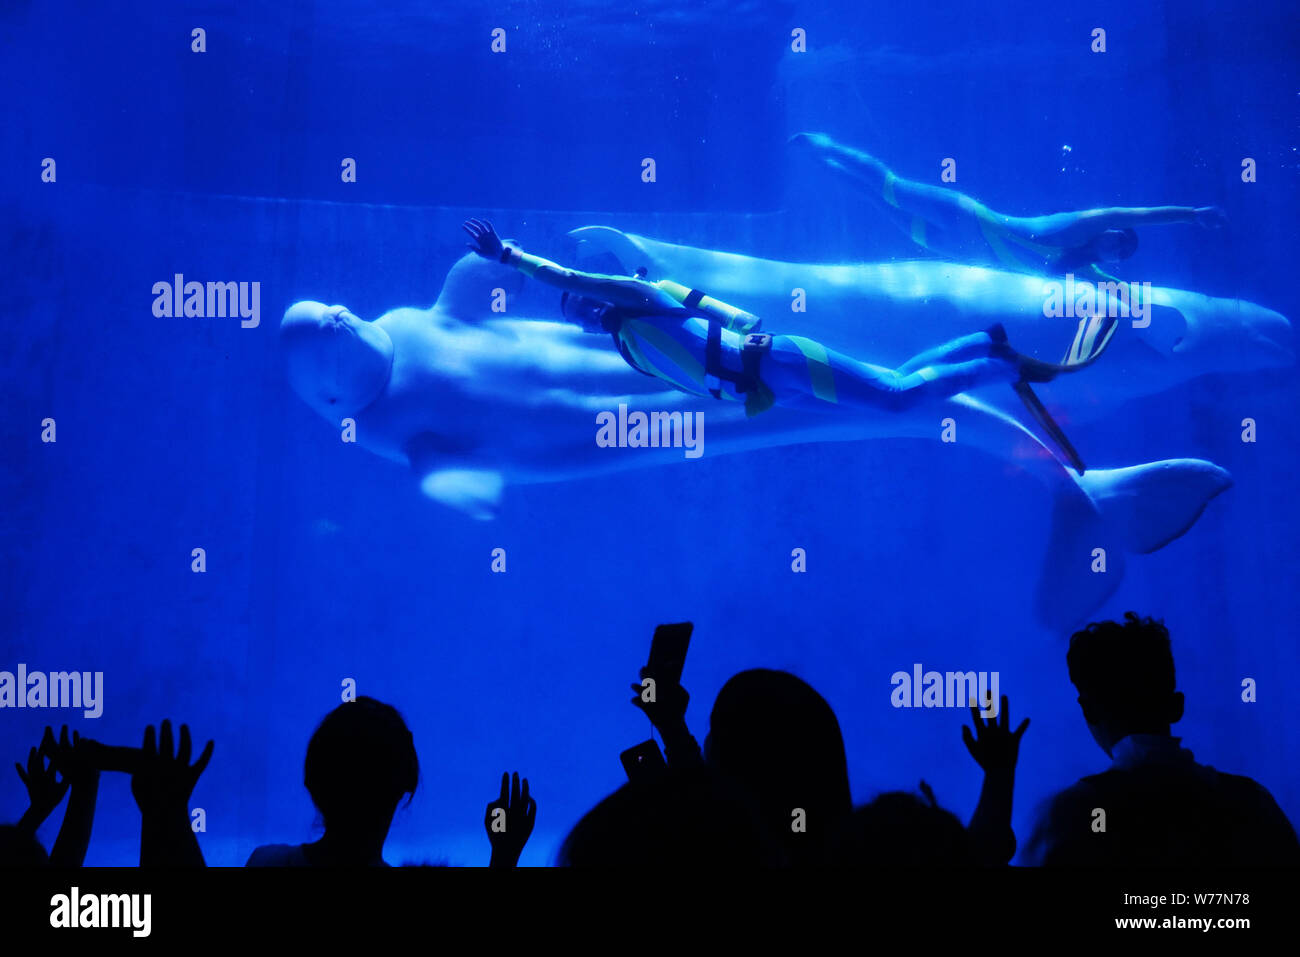 (190805) -- HARBIN, Aug. 5, 2019 (Xinhua) -- Tourists watch a performance at Harbin Polarland in Harbin, capital of northeast China's Heilongjiang Province, July 27, 2019. Attracted by the coolness in summer, many tourists come to Harbin for vacation. Meanwhile, Harbin is a city of music for the locals who got in touch with European classical music in an earlier time in China. With the cool summer and rich culture, Harbin received 36.23 million tourists and made revenue of 60.7 billion yuan (8.6 billion U.S. dollars) in the summer of 2018. (Xinhua/Wang Jianwei) Stock Photo